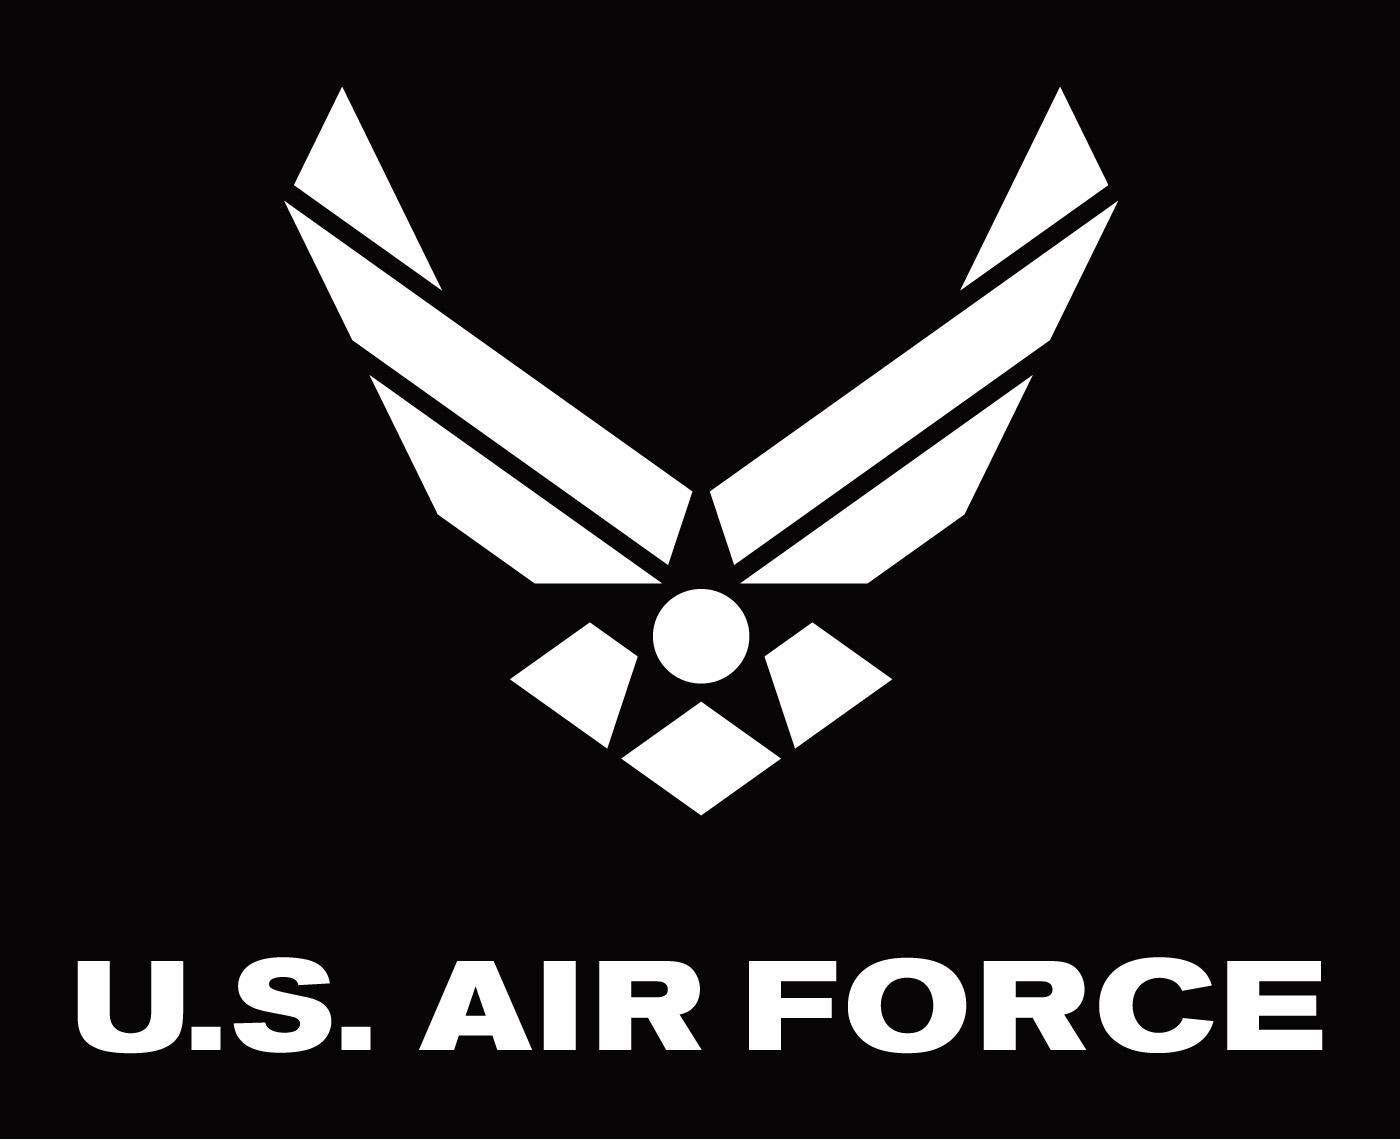 Aerojet Logo - Sigma Labs Joins Aerojet Rocketdyne in Quality Control For Air Force